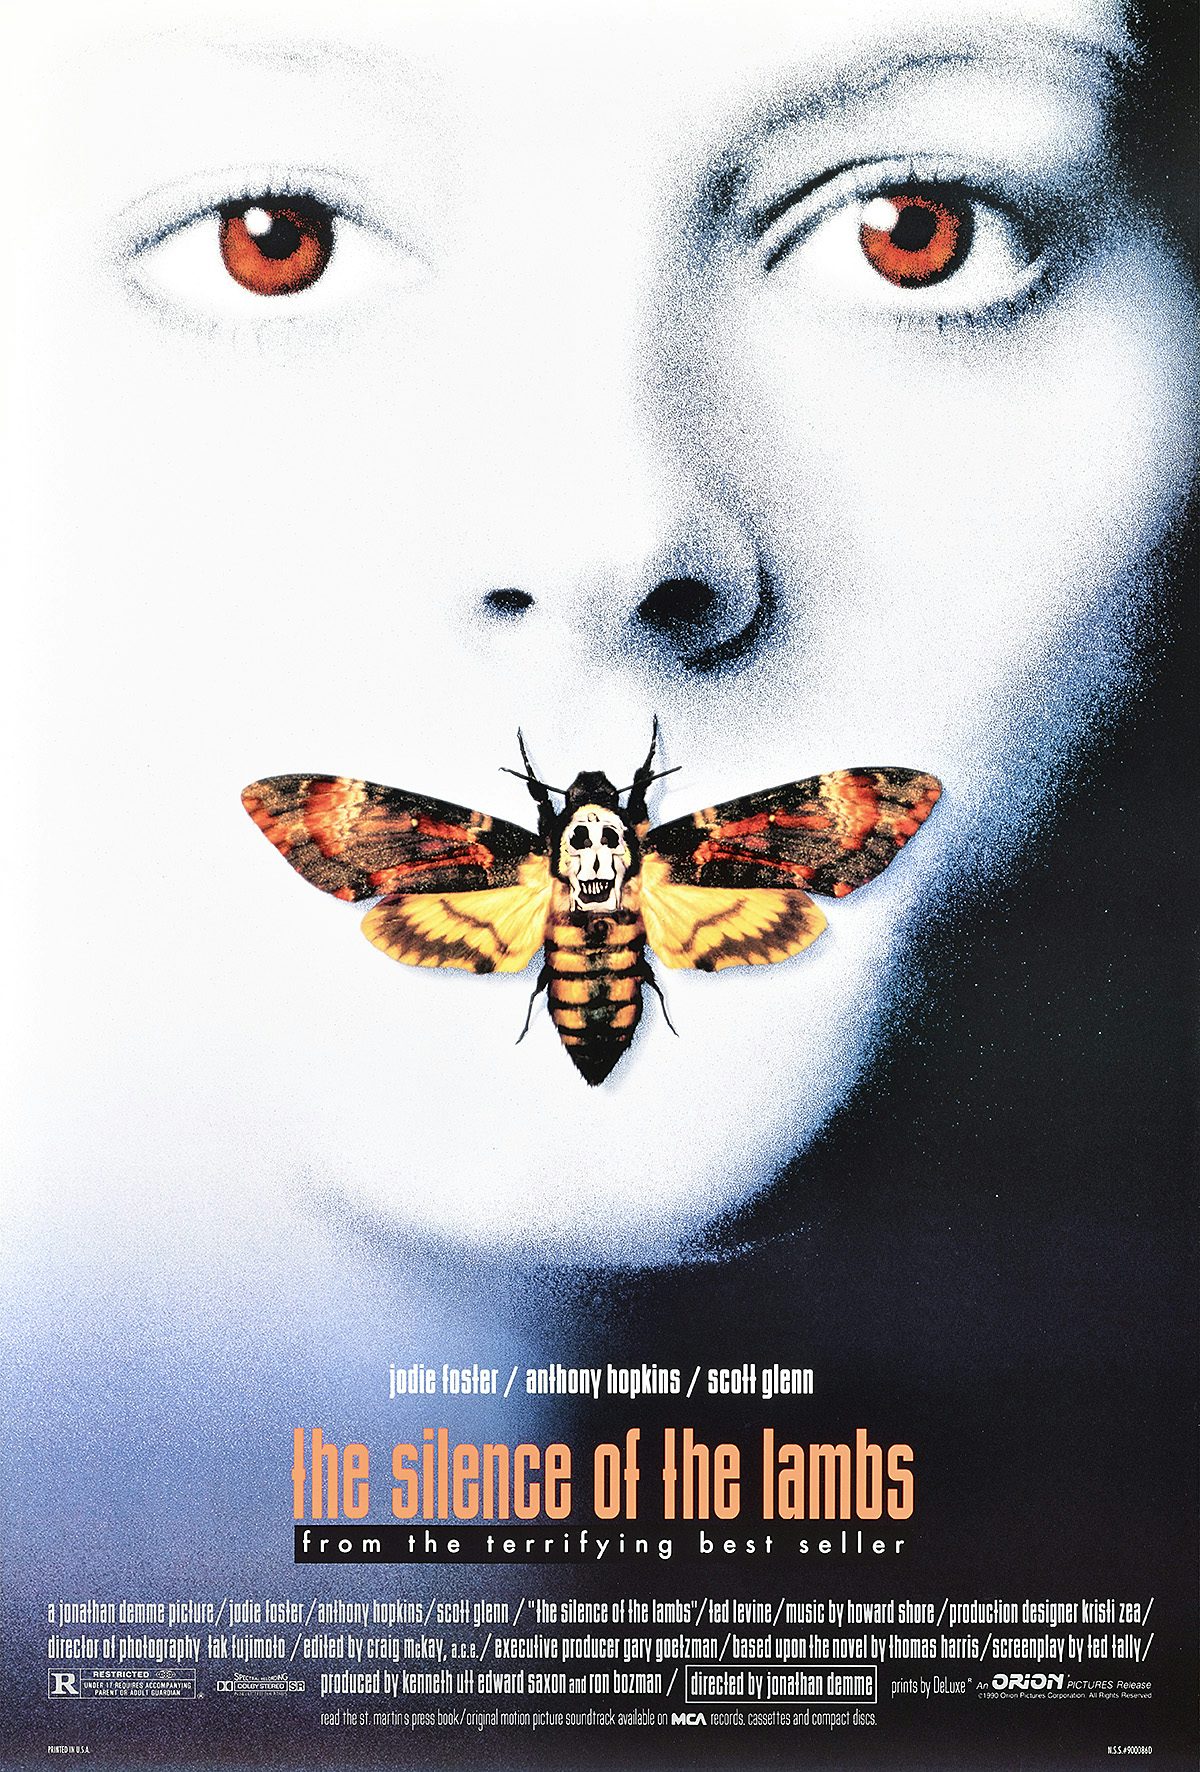 Poster design for The Silence of the Lambs showing a washed out portrait of star Jodie Foster whose mouth is covered by an image of a moth